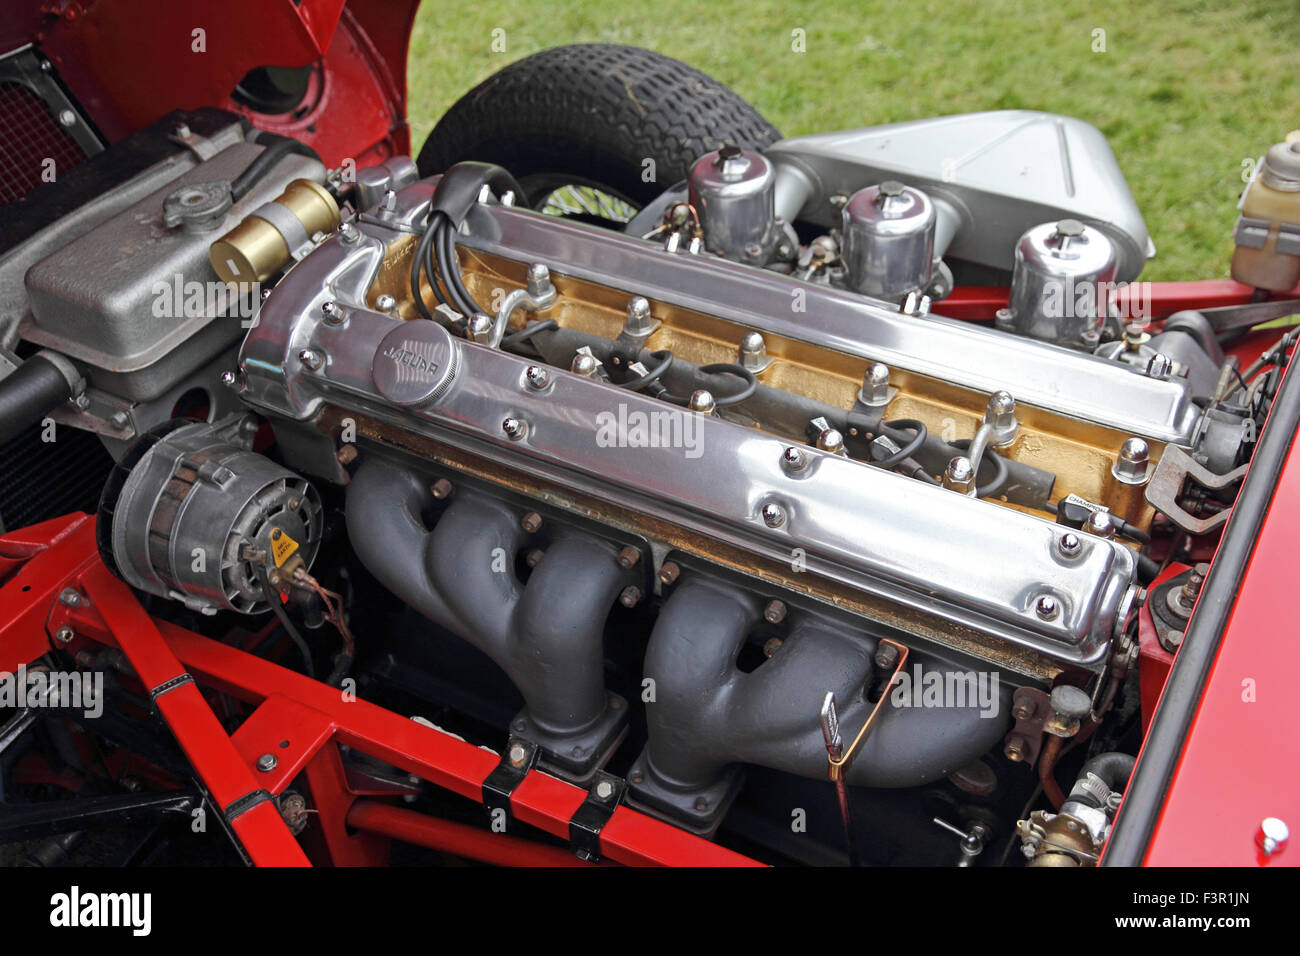 Engine Compartment Of Red 1967 Jaguar E Type Coupe Stock Photo Alamy